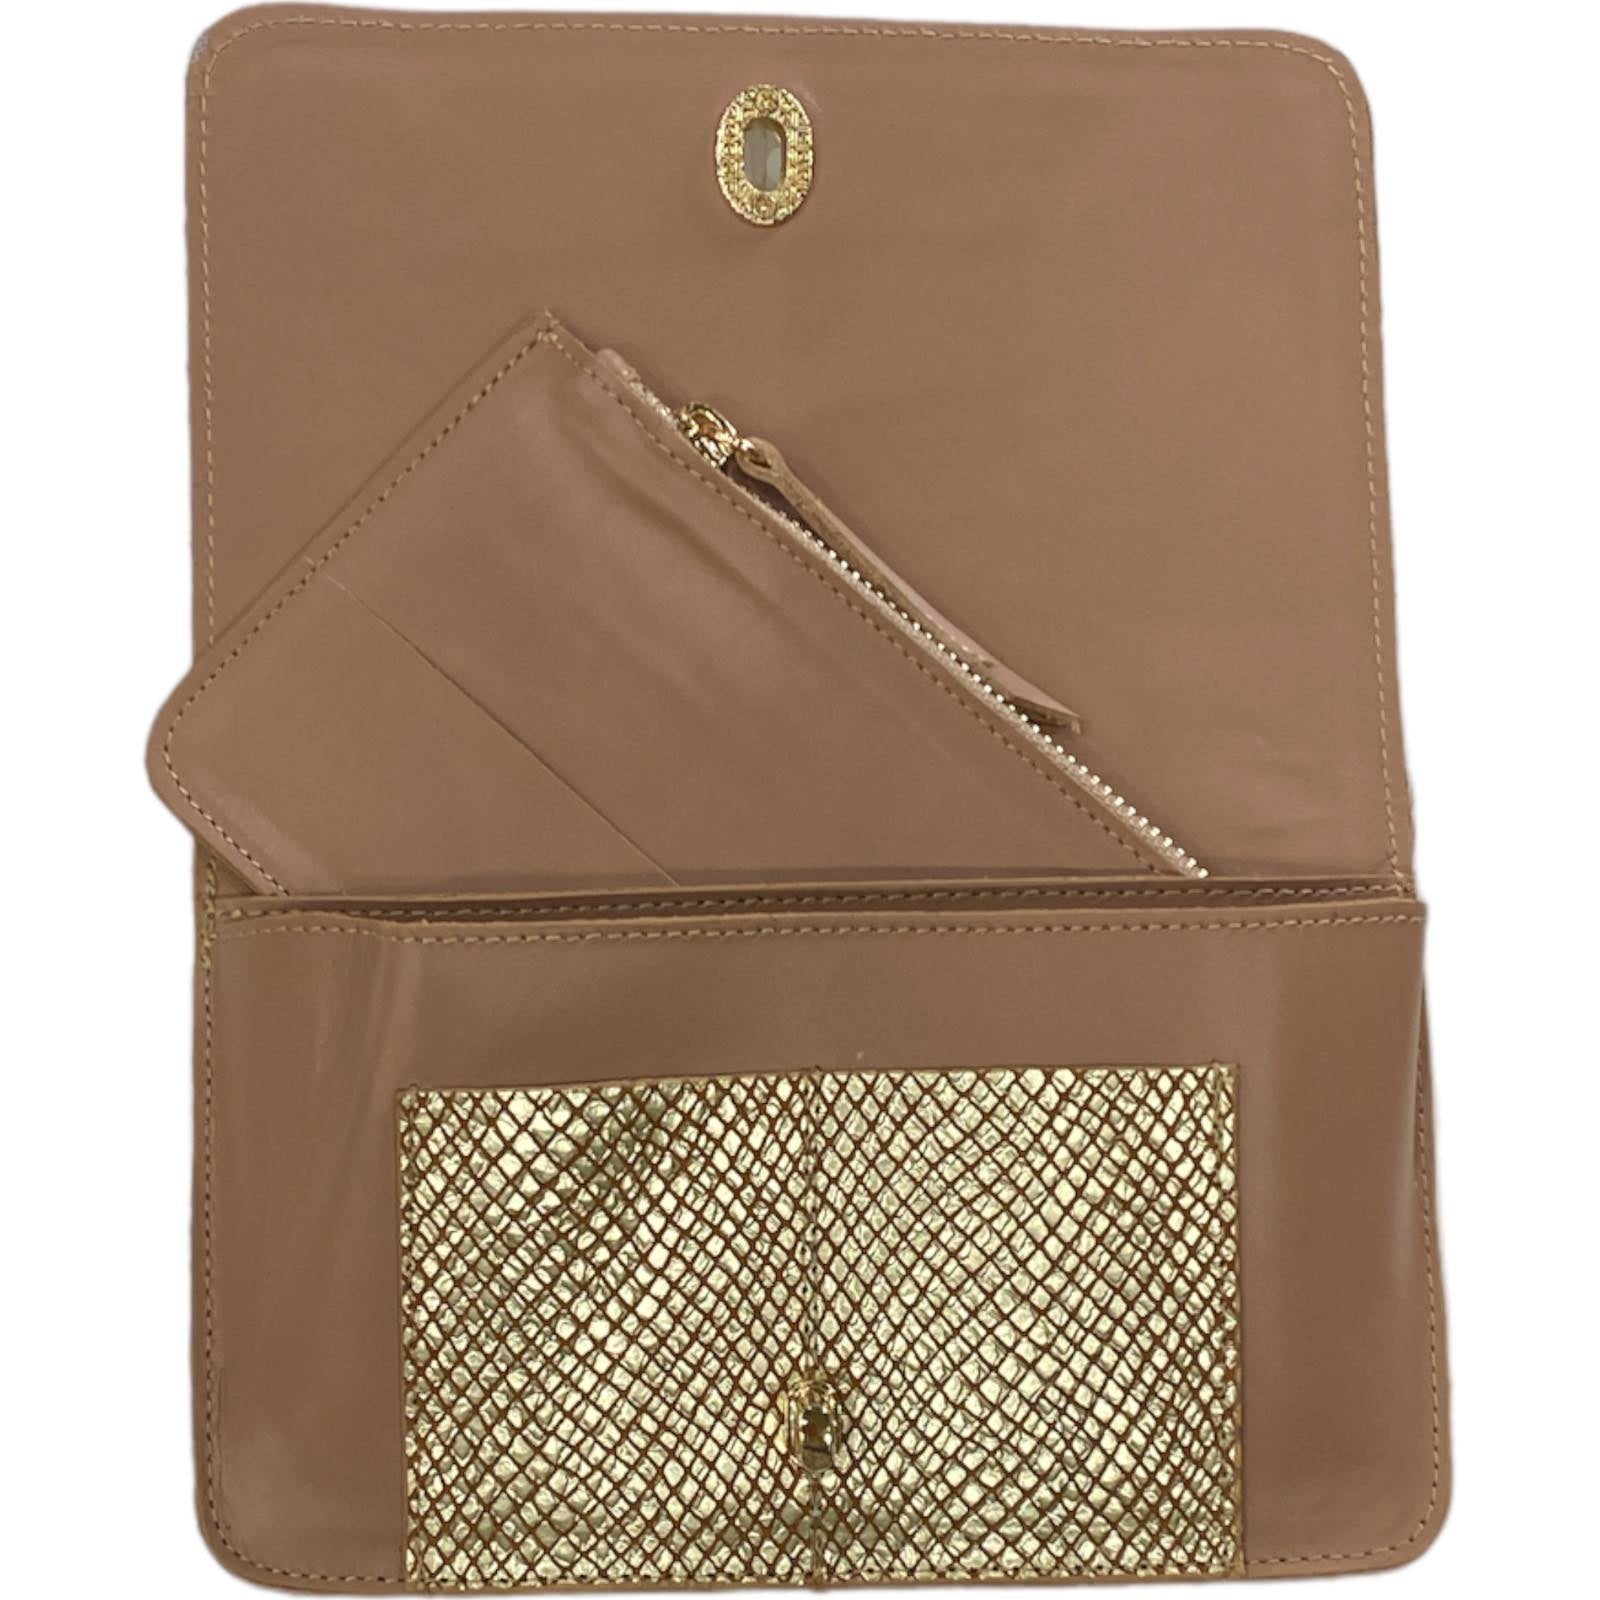 Beige and gold vintage calf-hair leather multi wallet bag